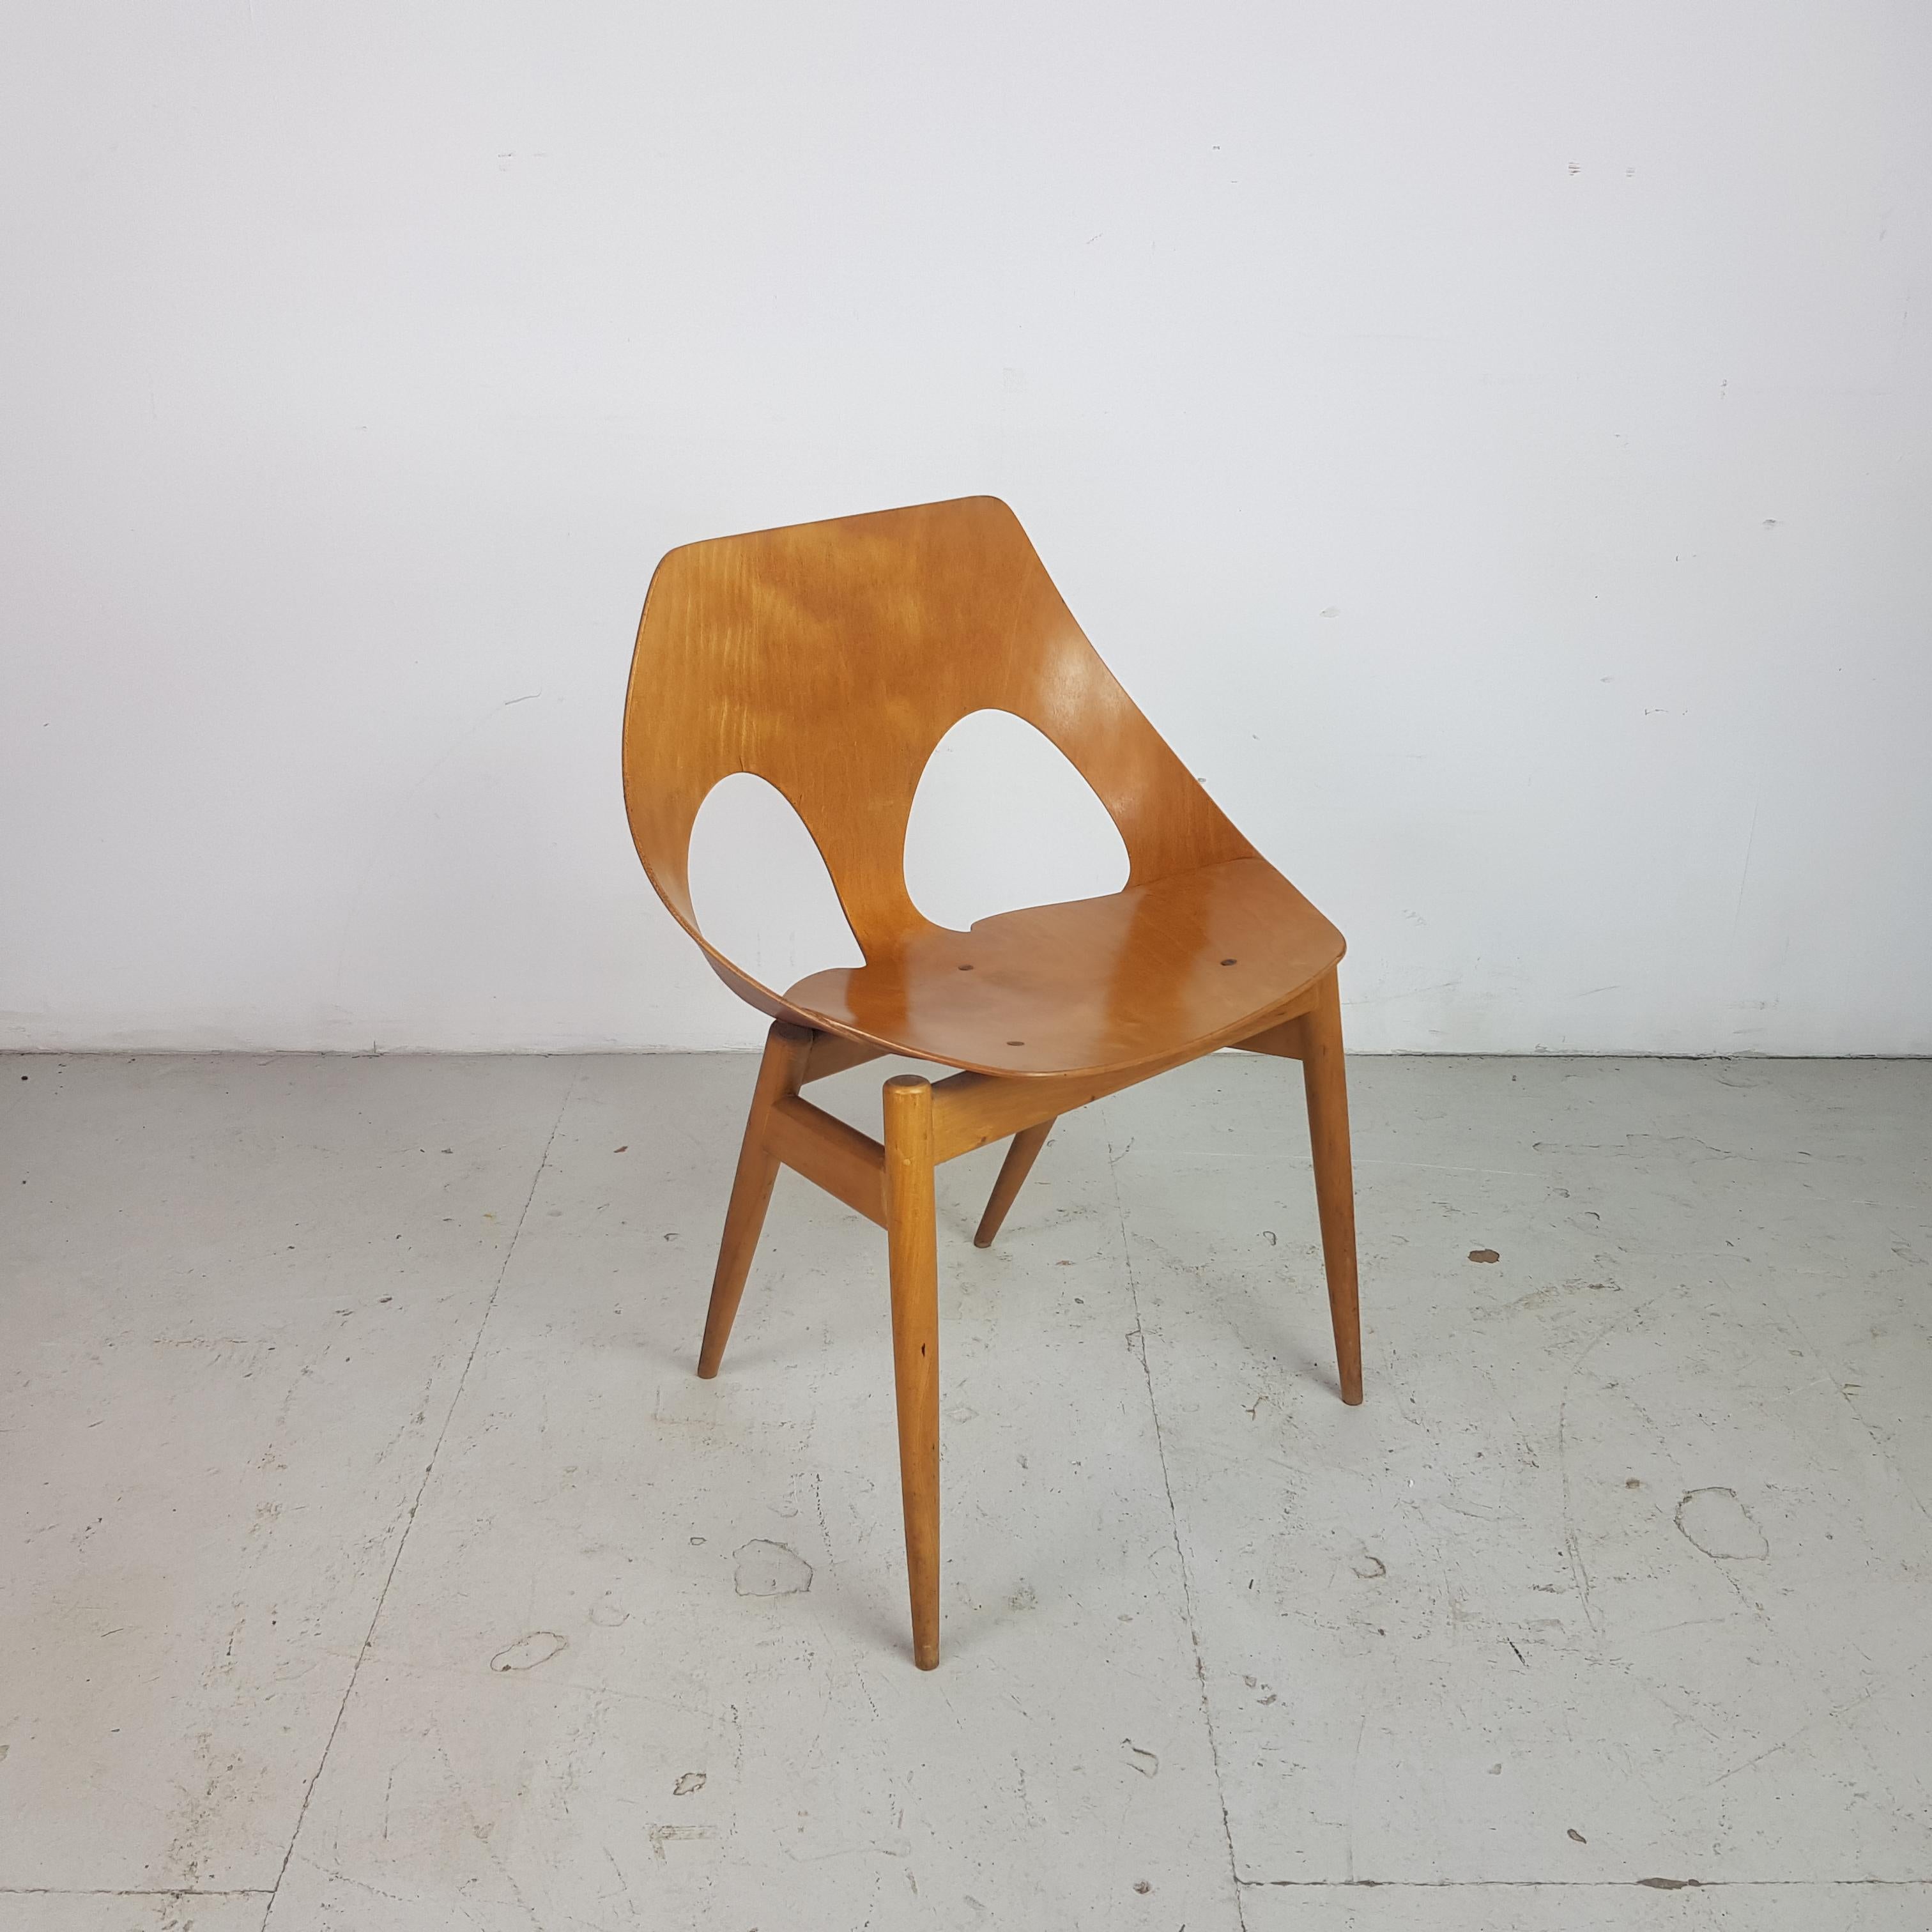 The gorgeous 1950s Jason chair designed by Carl Jacobs & Frank Guille for Kandya.

The Jason chair was designed by the Danish designer Carl Jacobs but was manufactured by Kandya, a British firm. This lightweight, stackable, chair has gently